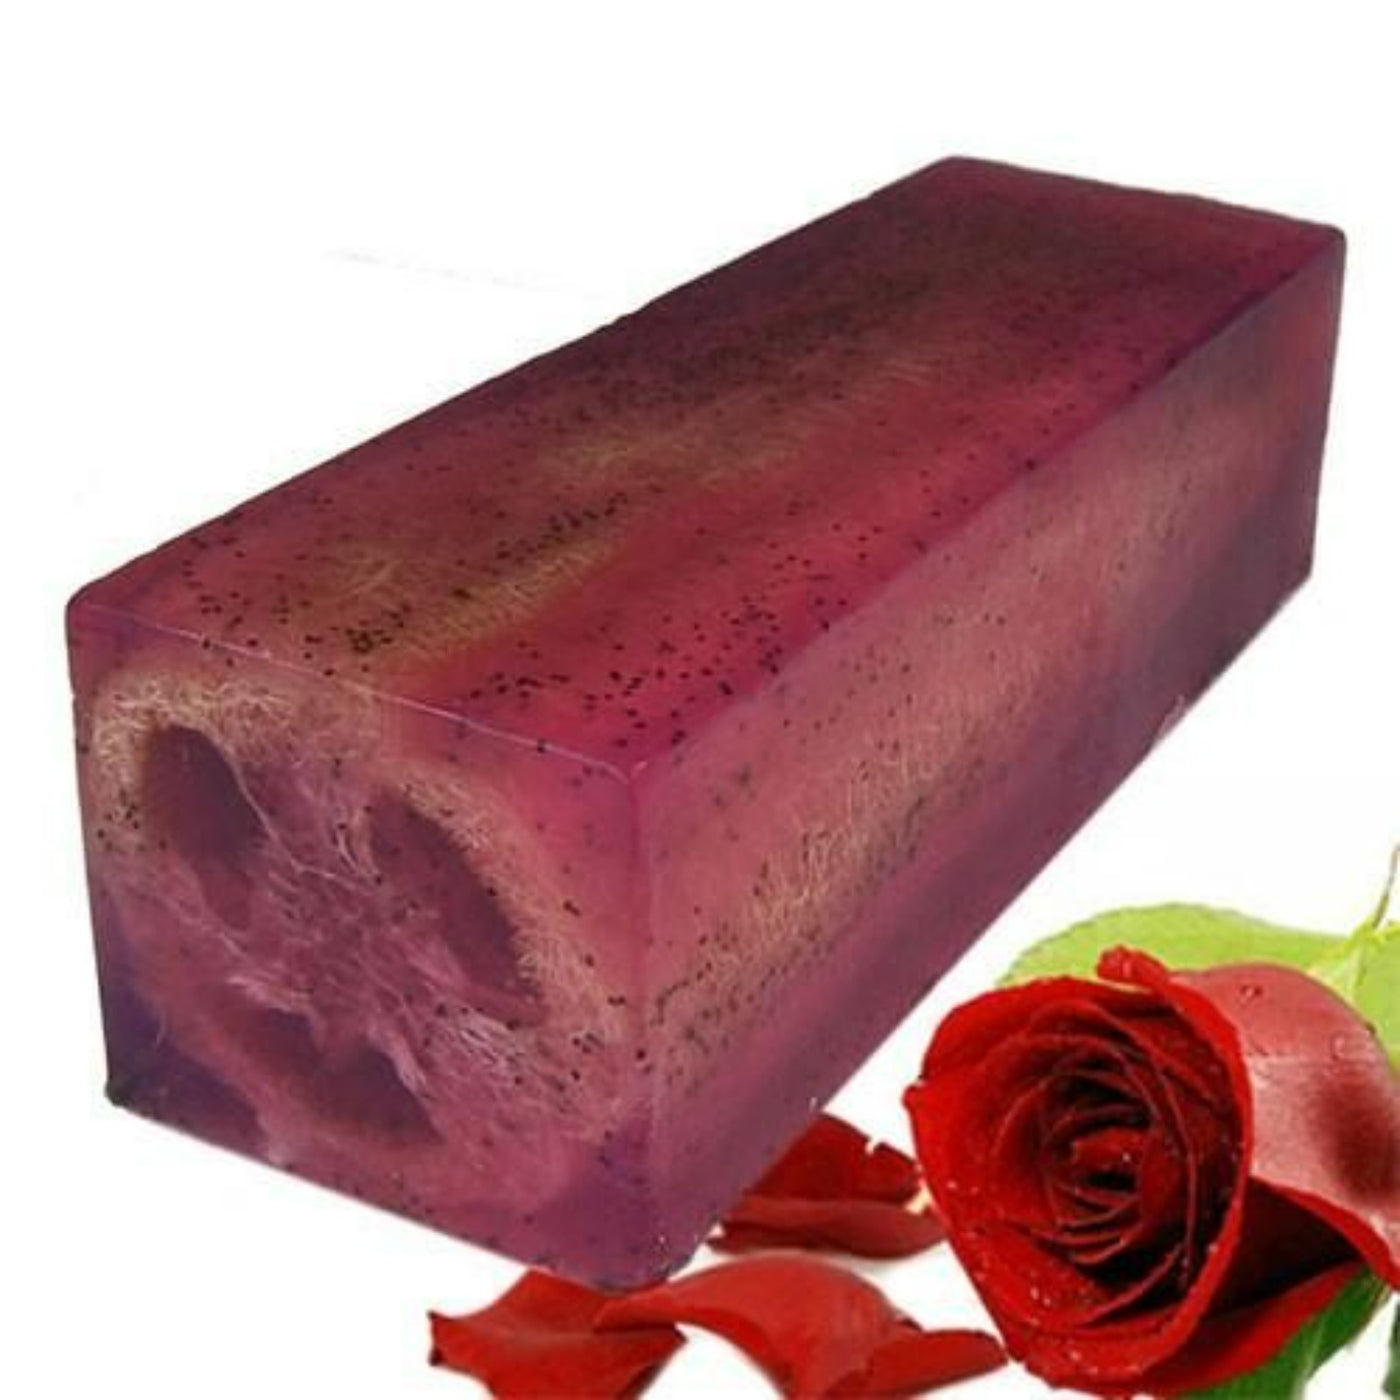 Loofah Exfoliating Soap Loaf - Rough & Ready Rose 1.5kg.